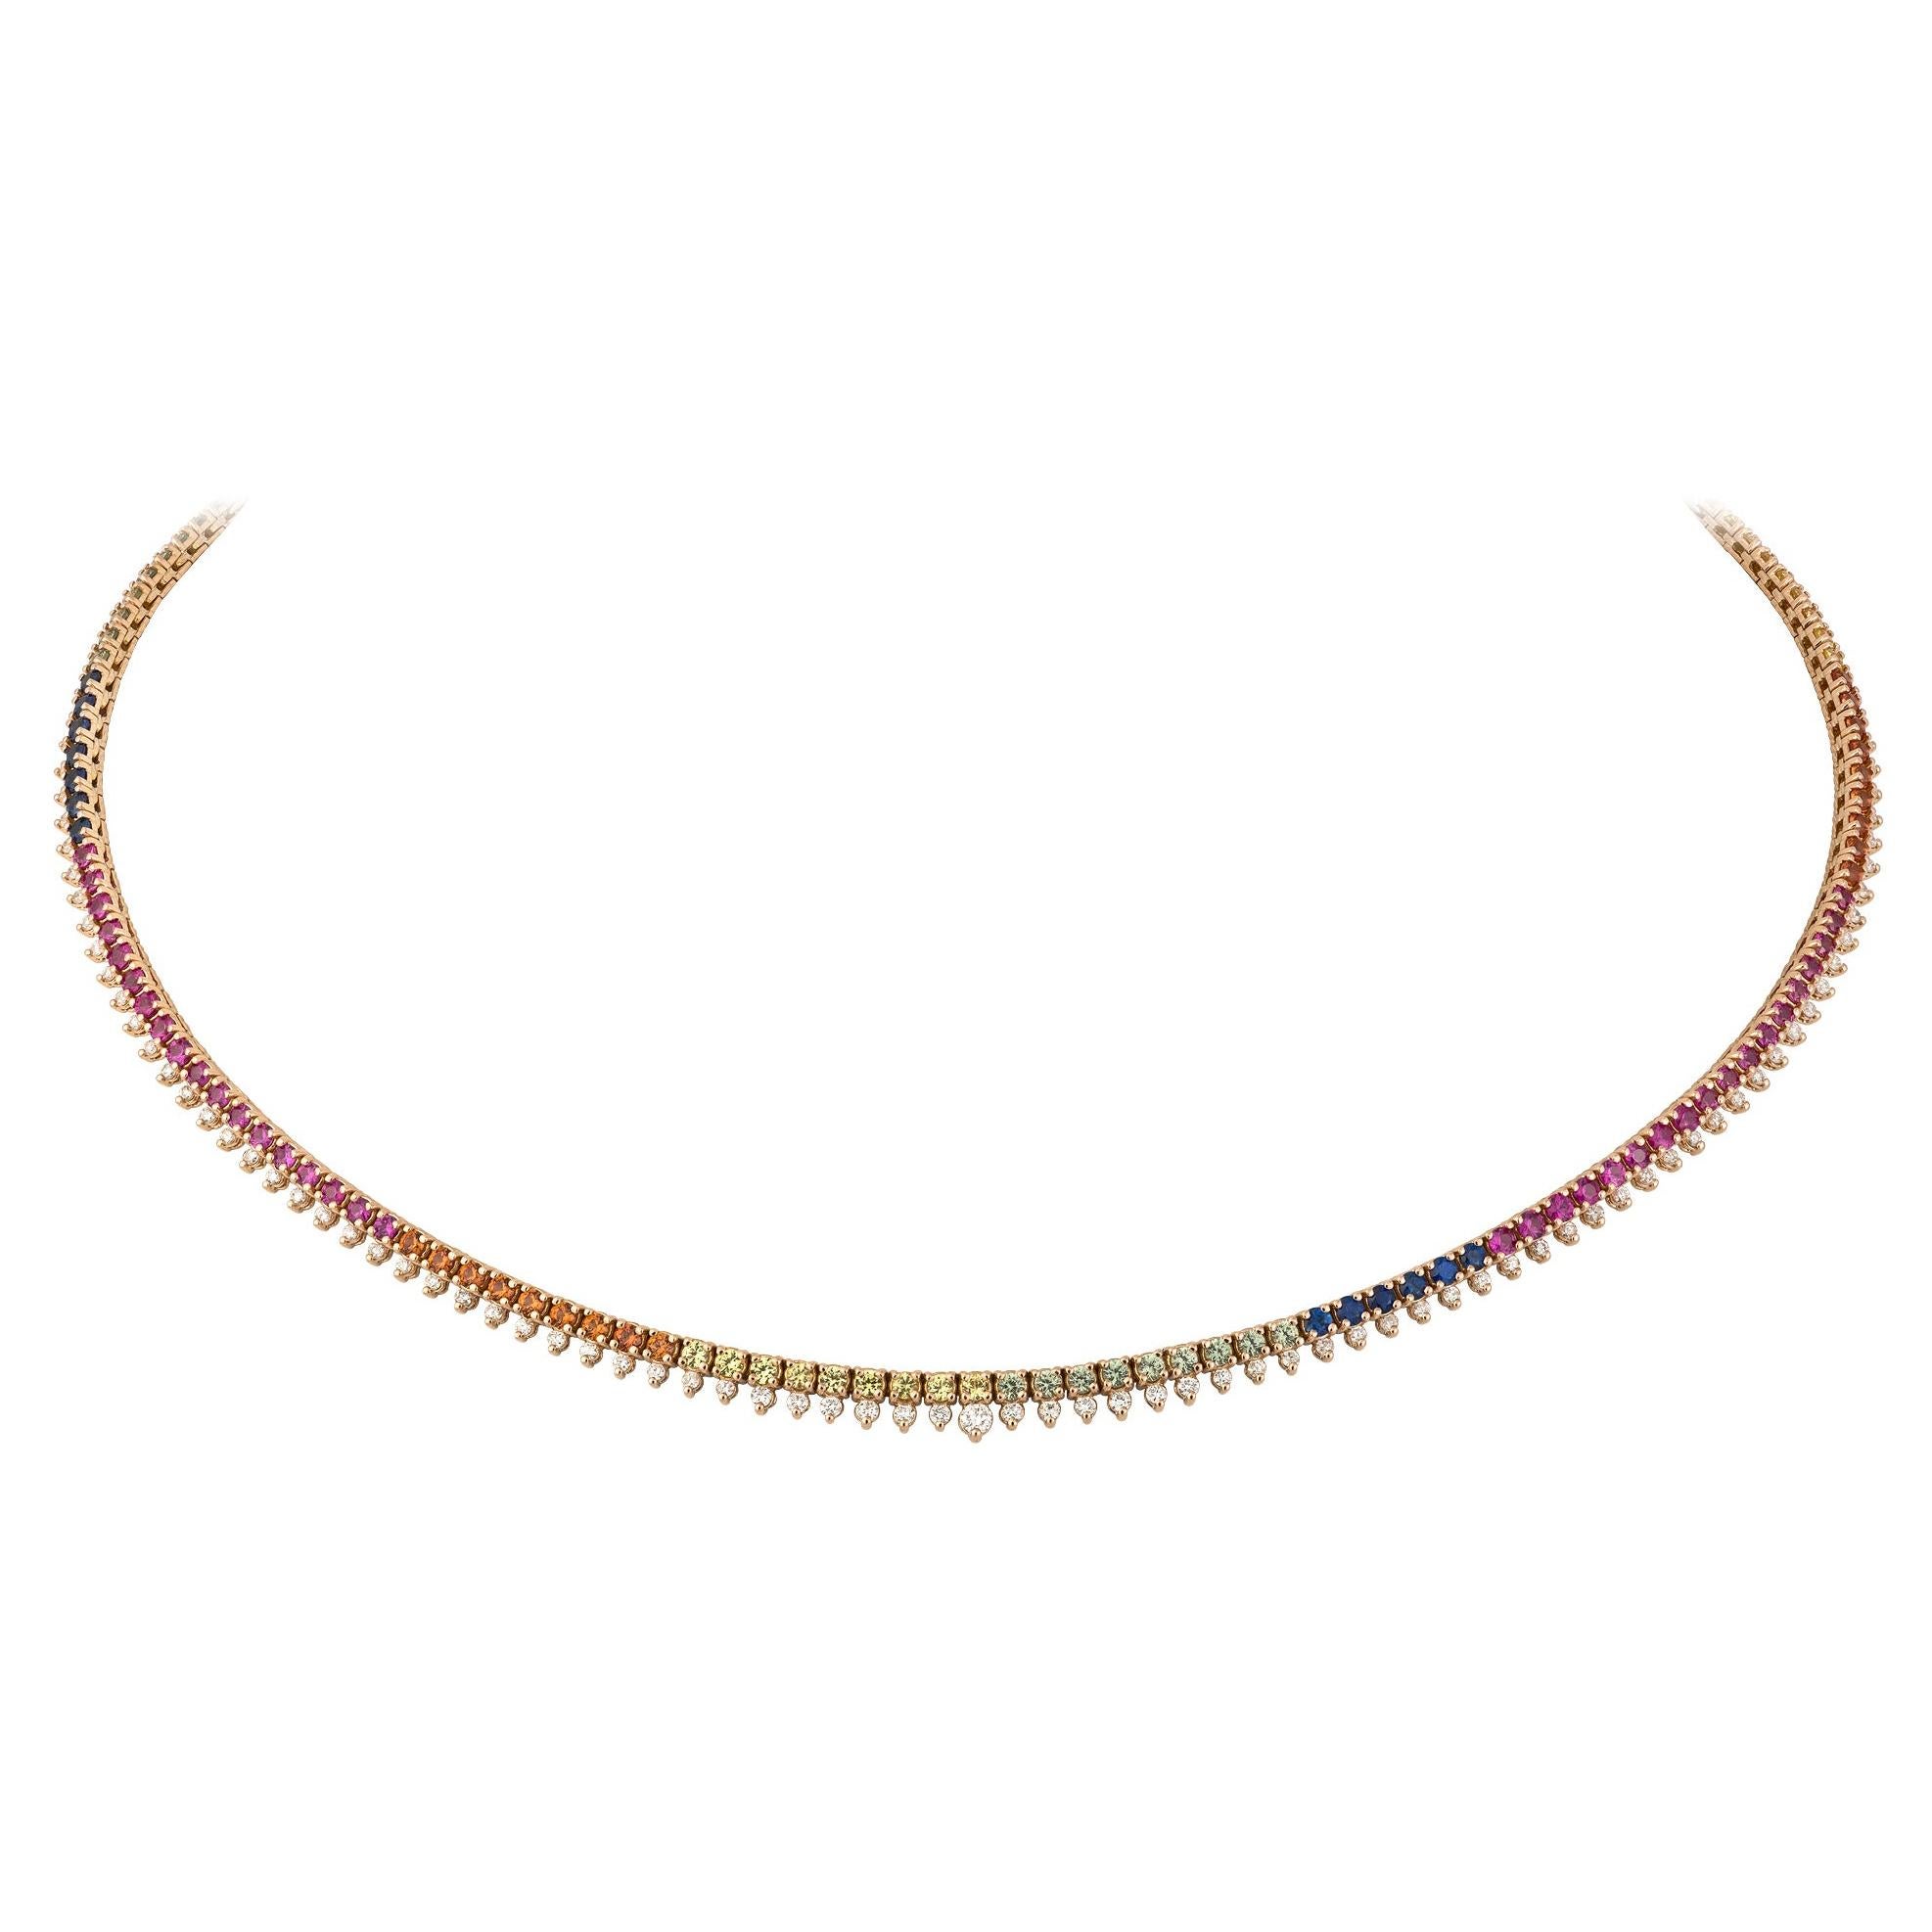 Fashionable Circle Multi Sapphire 18k Pink Gold Necklace Choker for Her